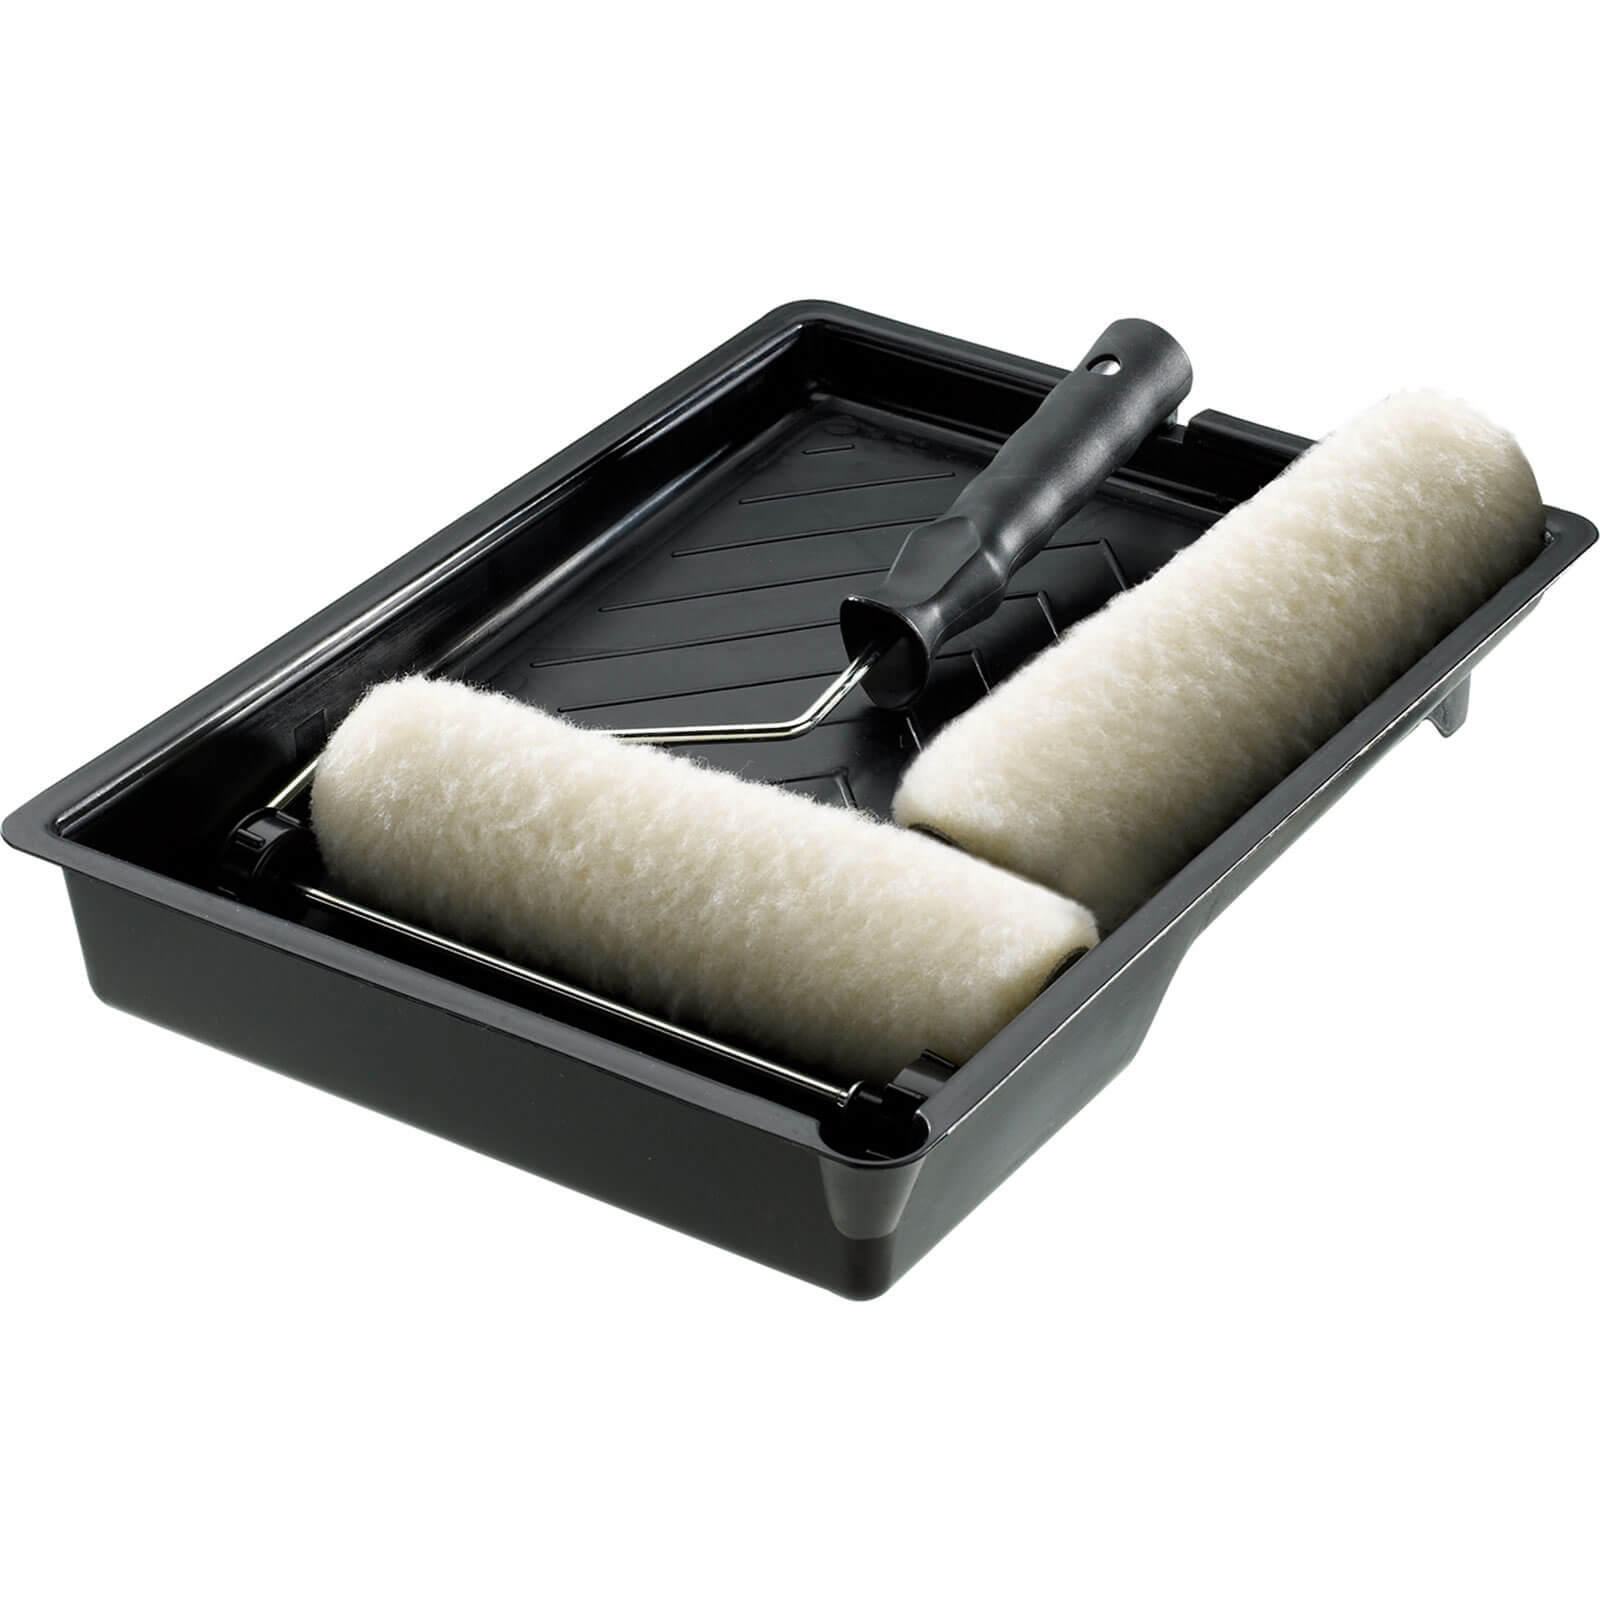 Stanley 9" Paint Roller Tray Kit and 2 Roller Refills